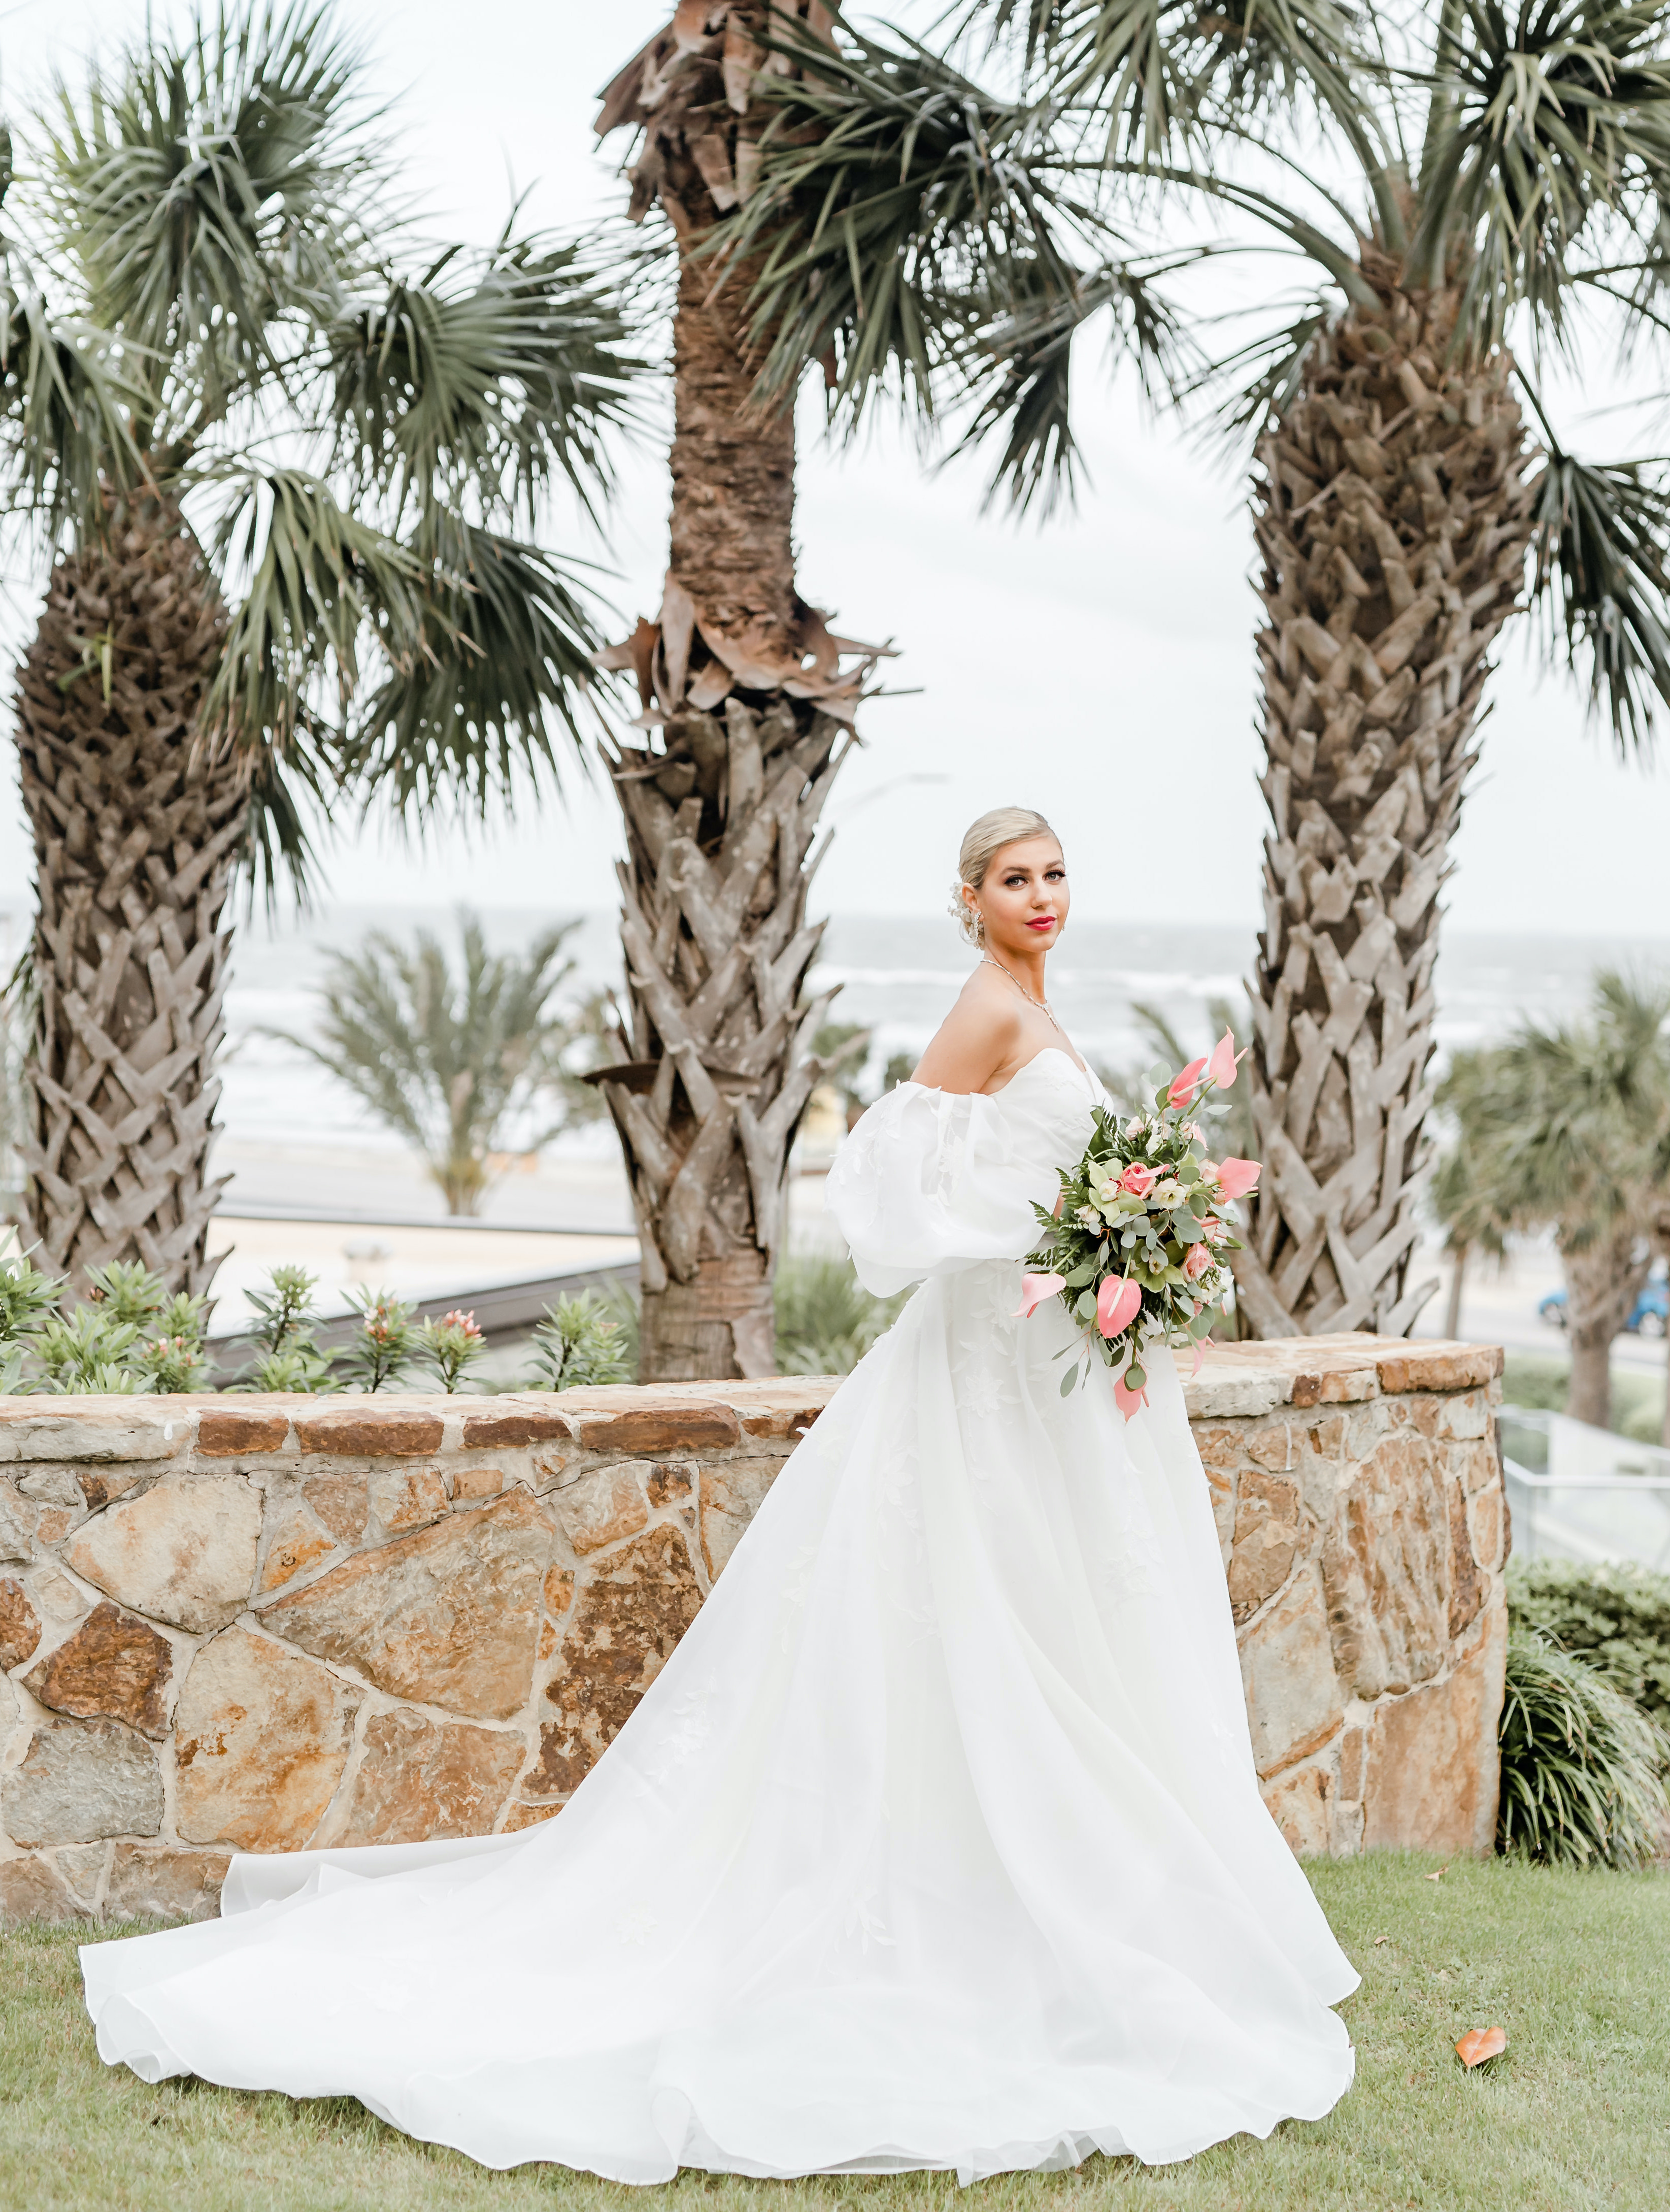 A bride poses in front of the beach and palm trees with a puffy wedding gown and a tropical bridal bouquet.